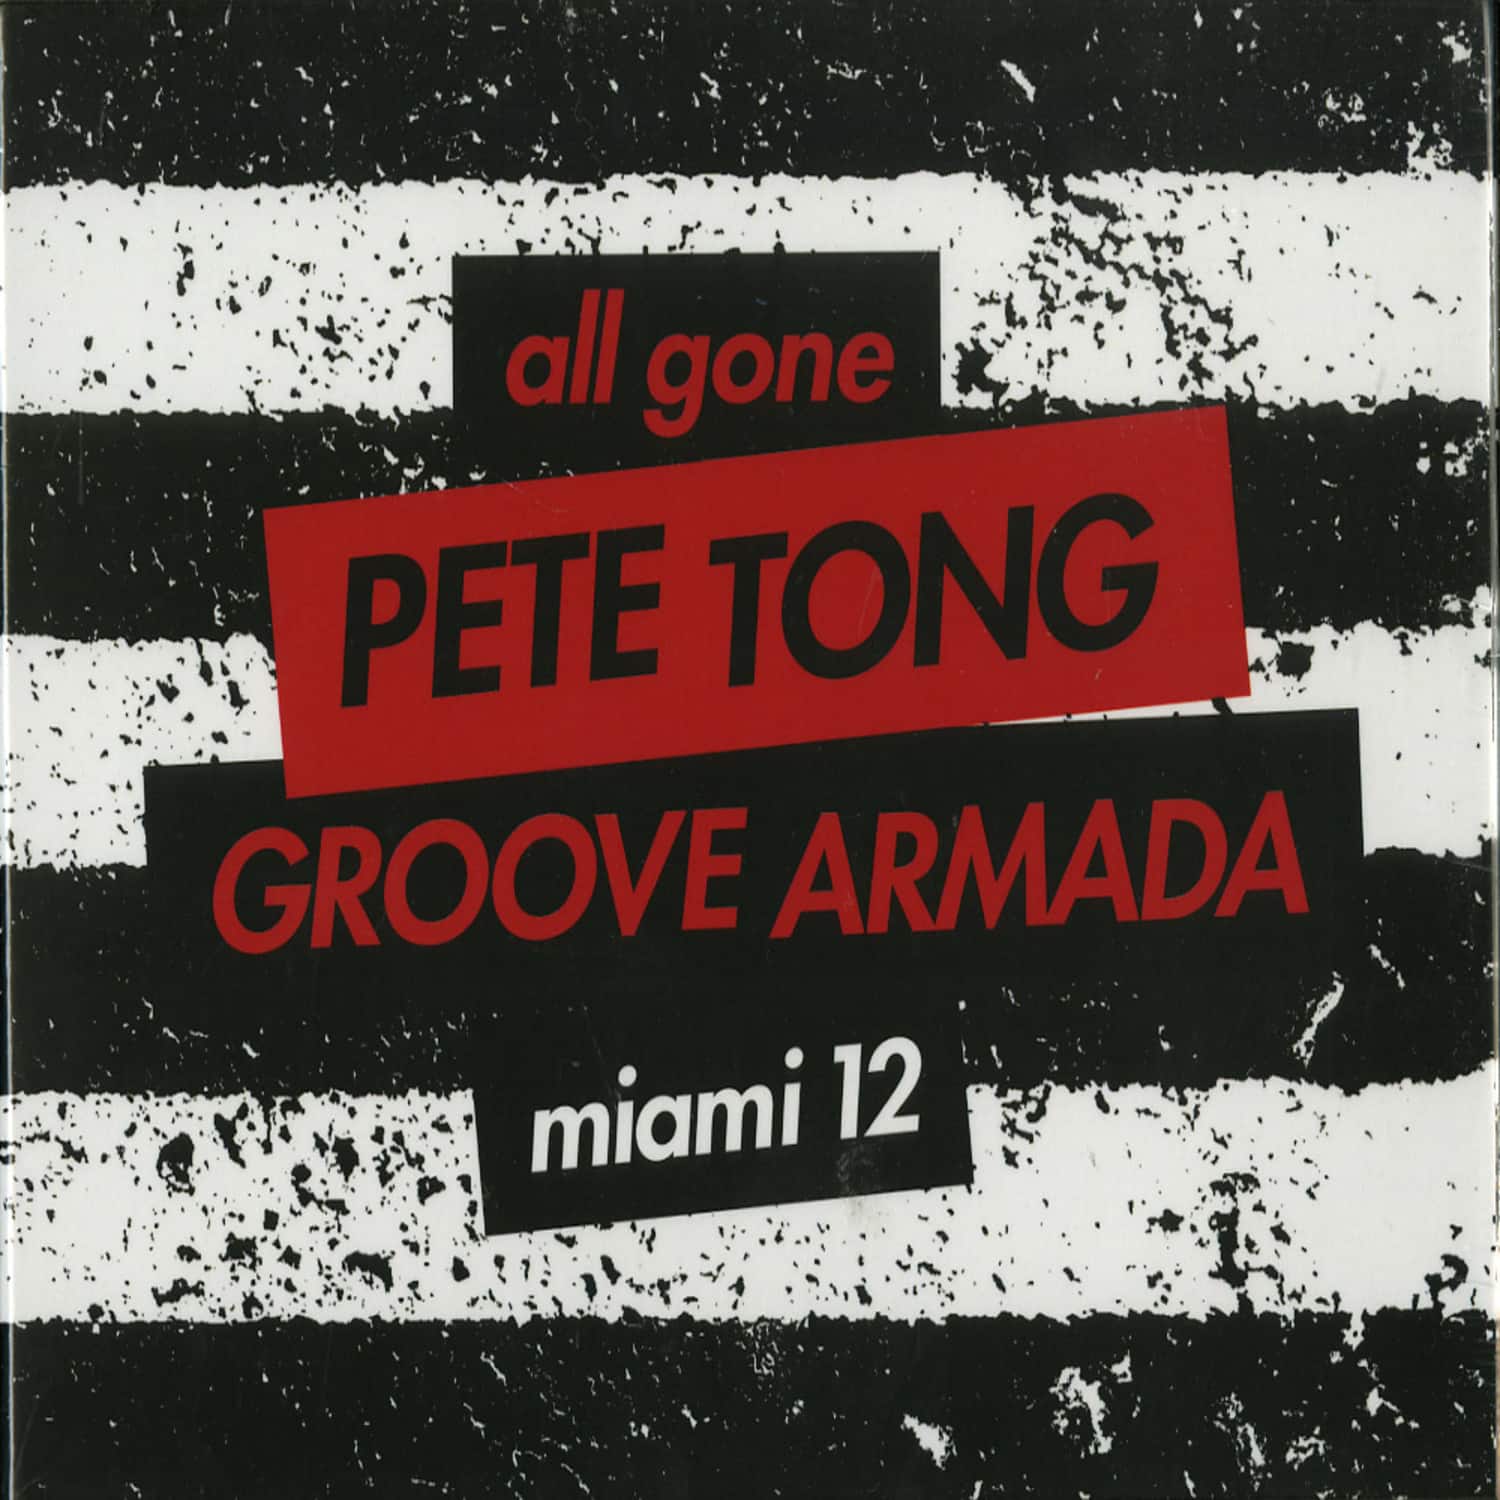 Pete Tong & Groove Armada - ALL GONE MIAMI 12 